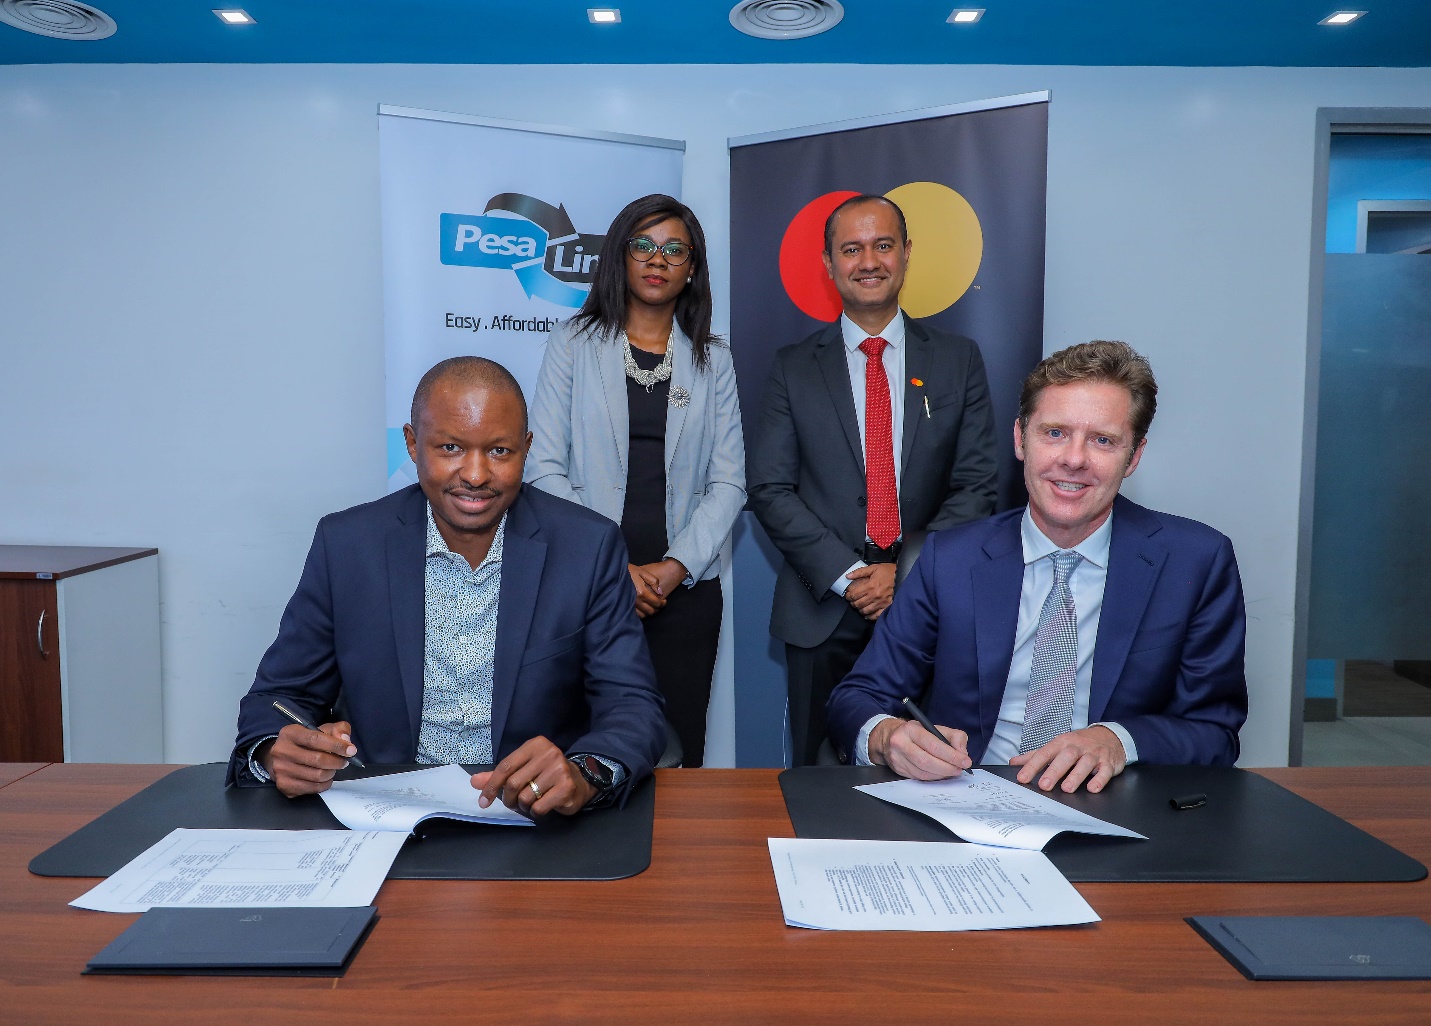 Mastercard Signs MoU With PesaLink to Drive Digital Transformation of the Payments Sector in Kenya